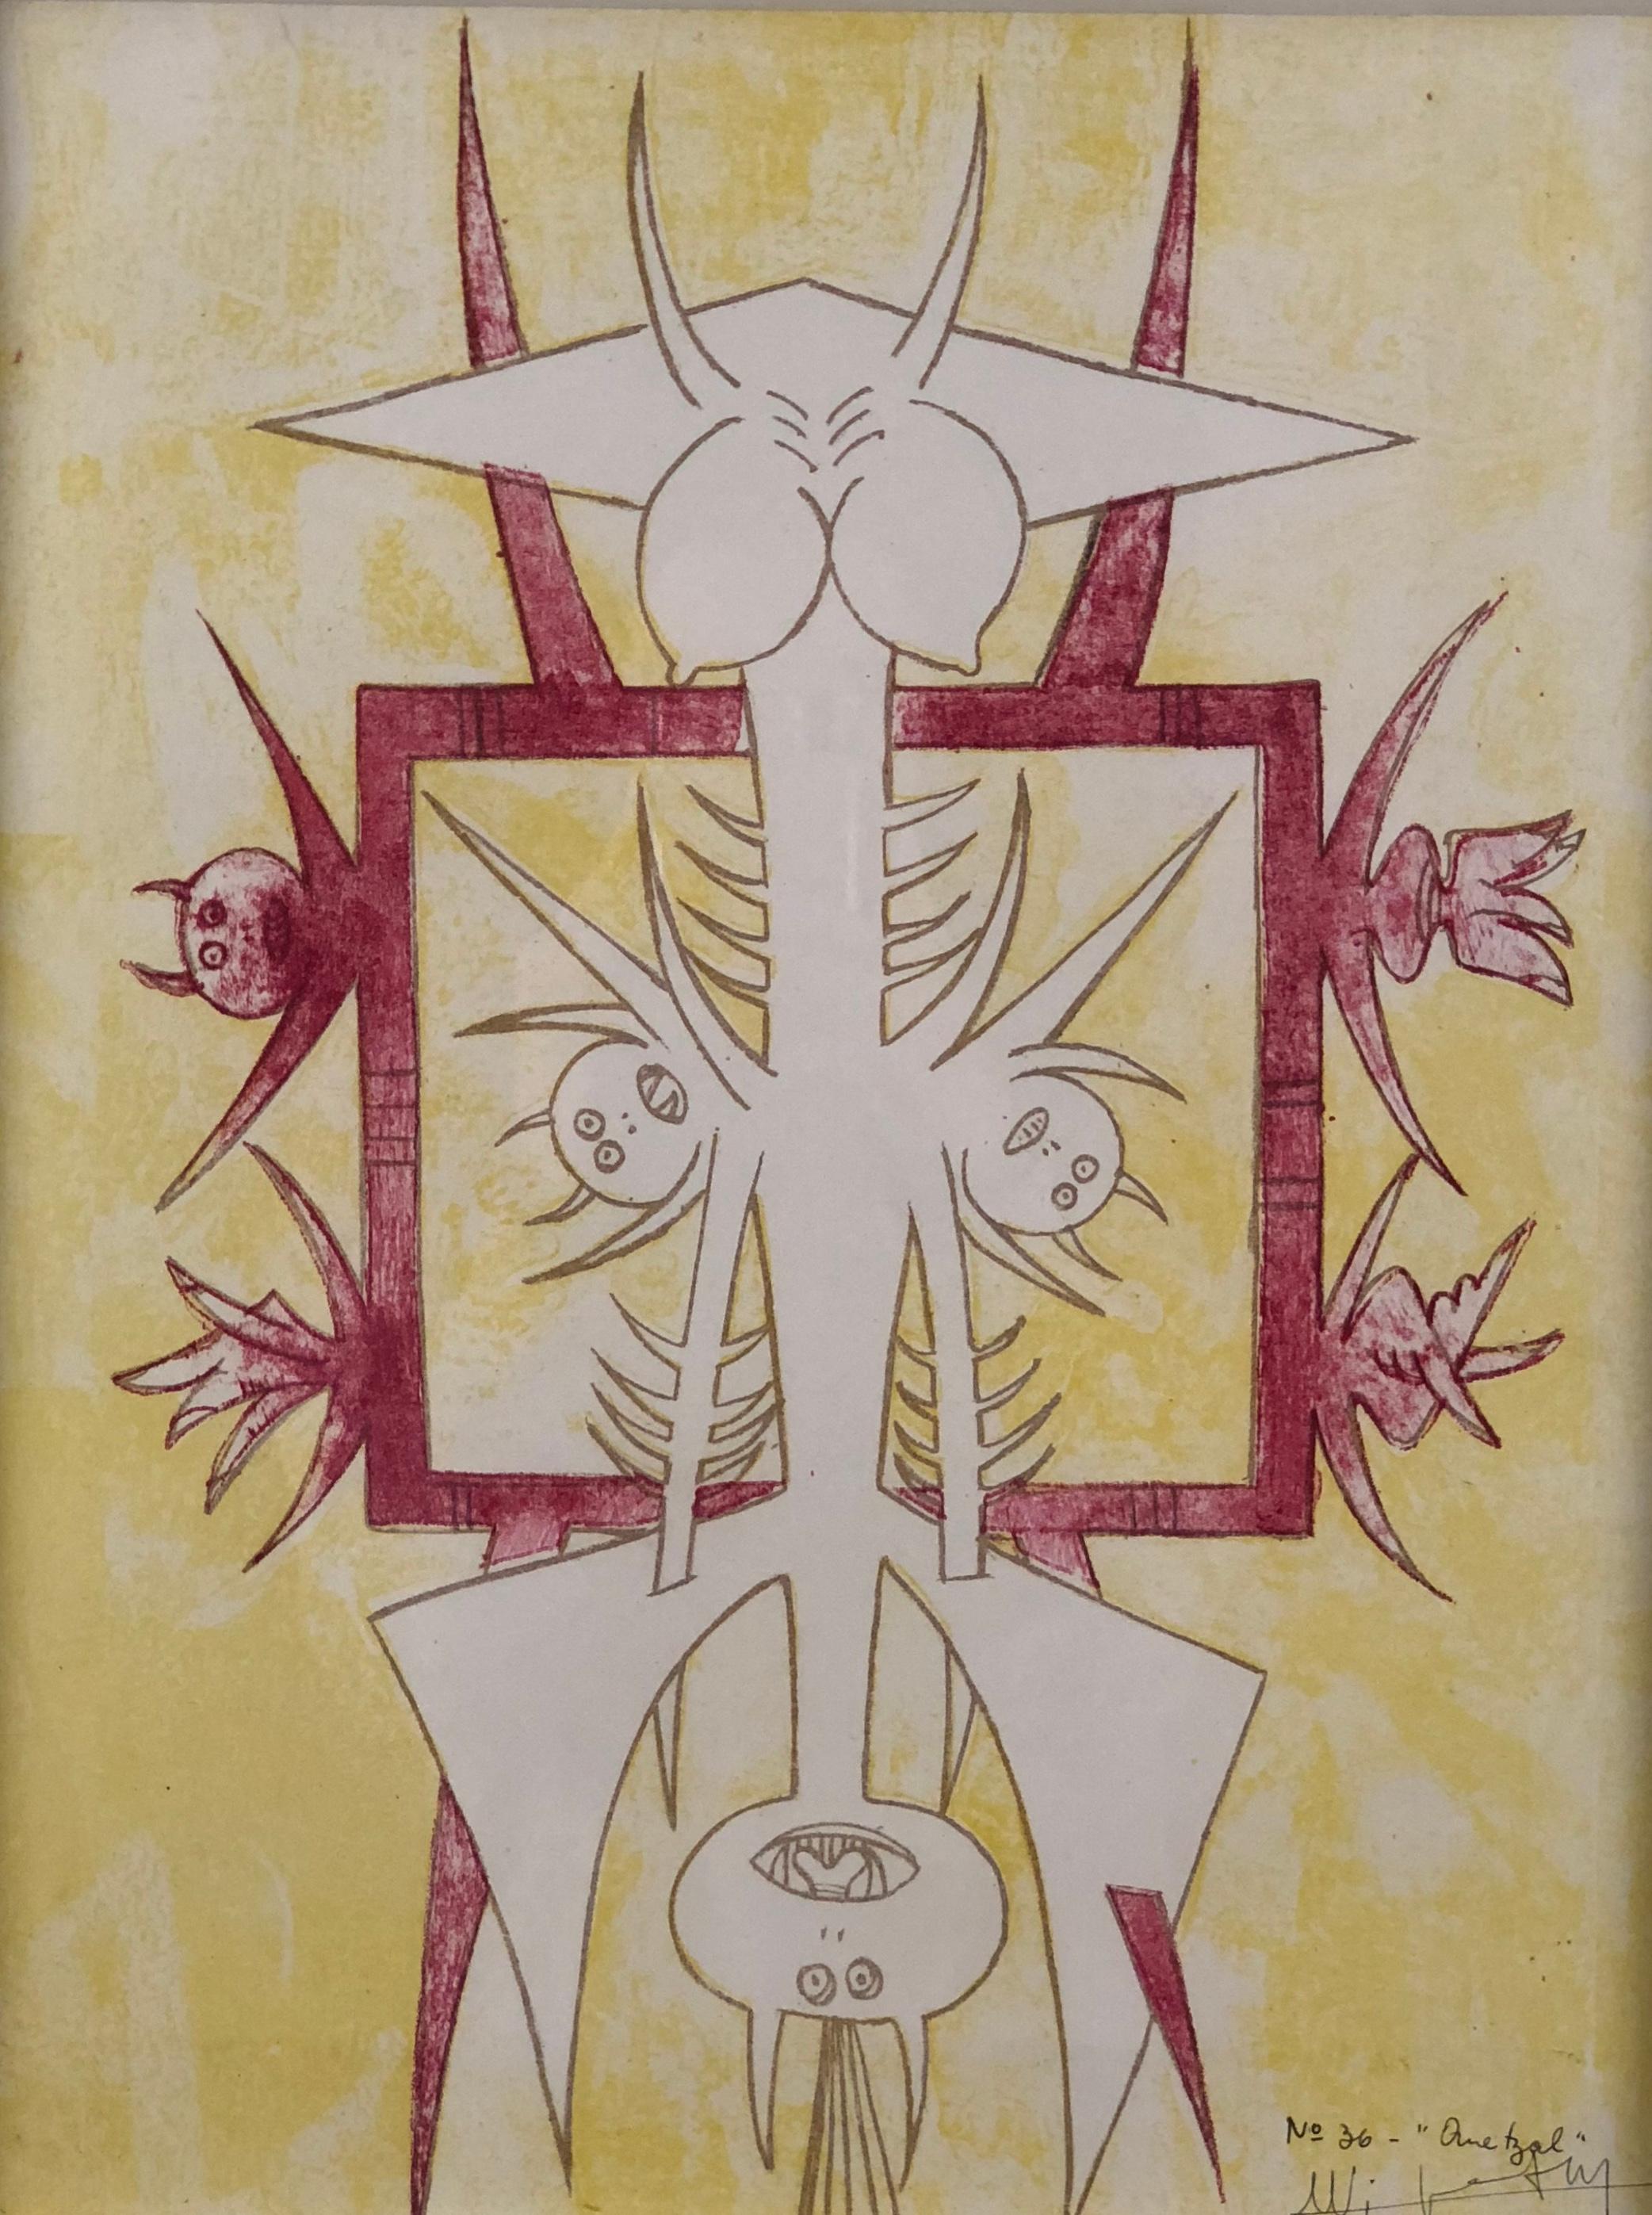 Wilfredo Lam Abstract Print - Wifredo Lam, "Quetzal", from "Brunidor Portfolio Number 1", original lithograph